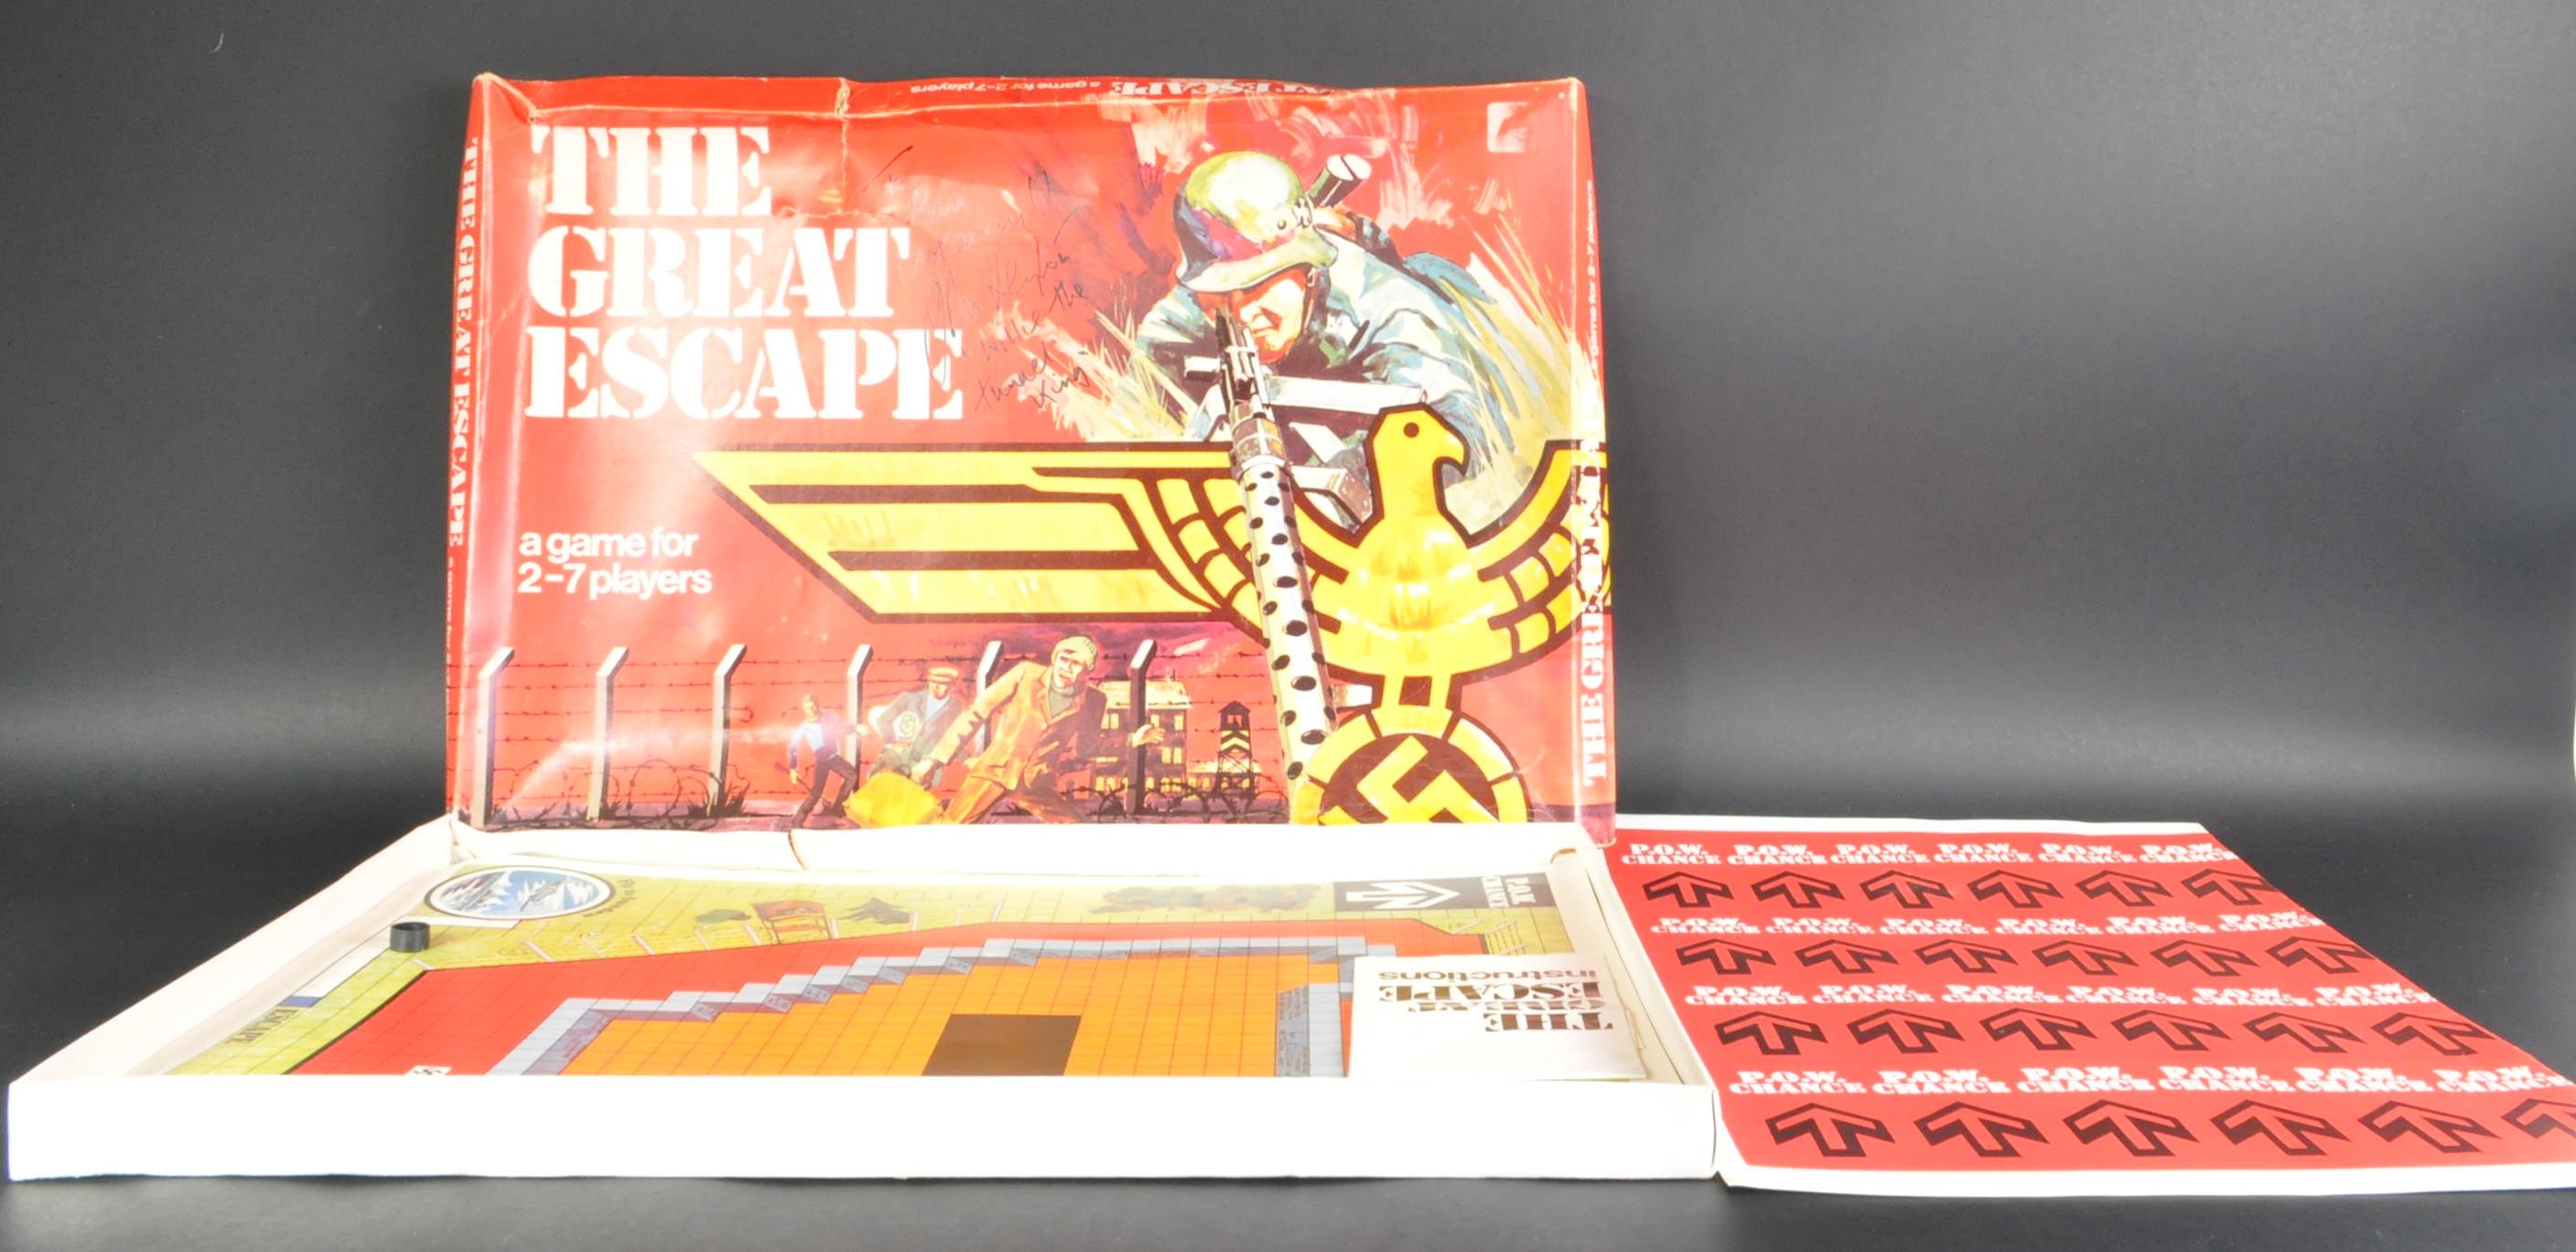 THE GREAT ESCAPE - VINTAGE BOARD GAME SIGNED BY JOHN LEYTON